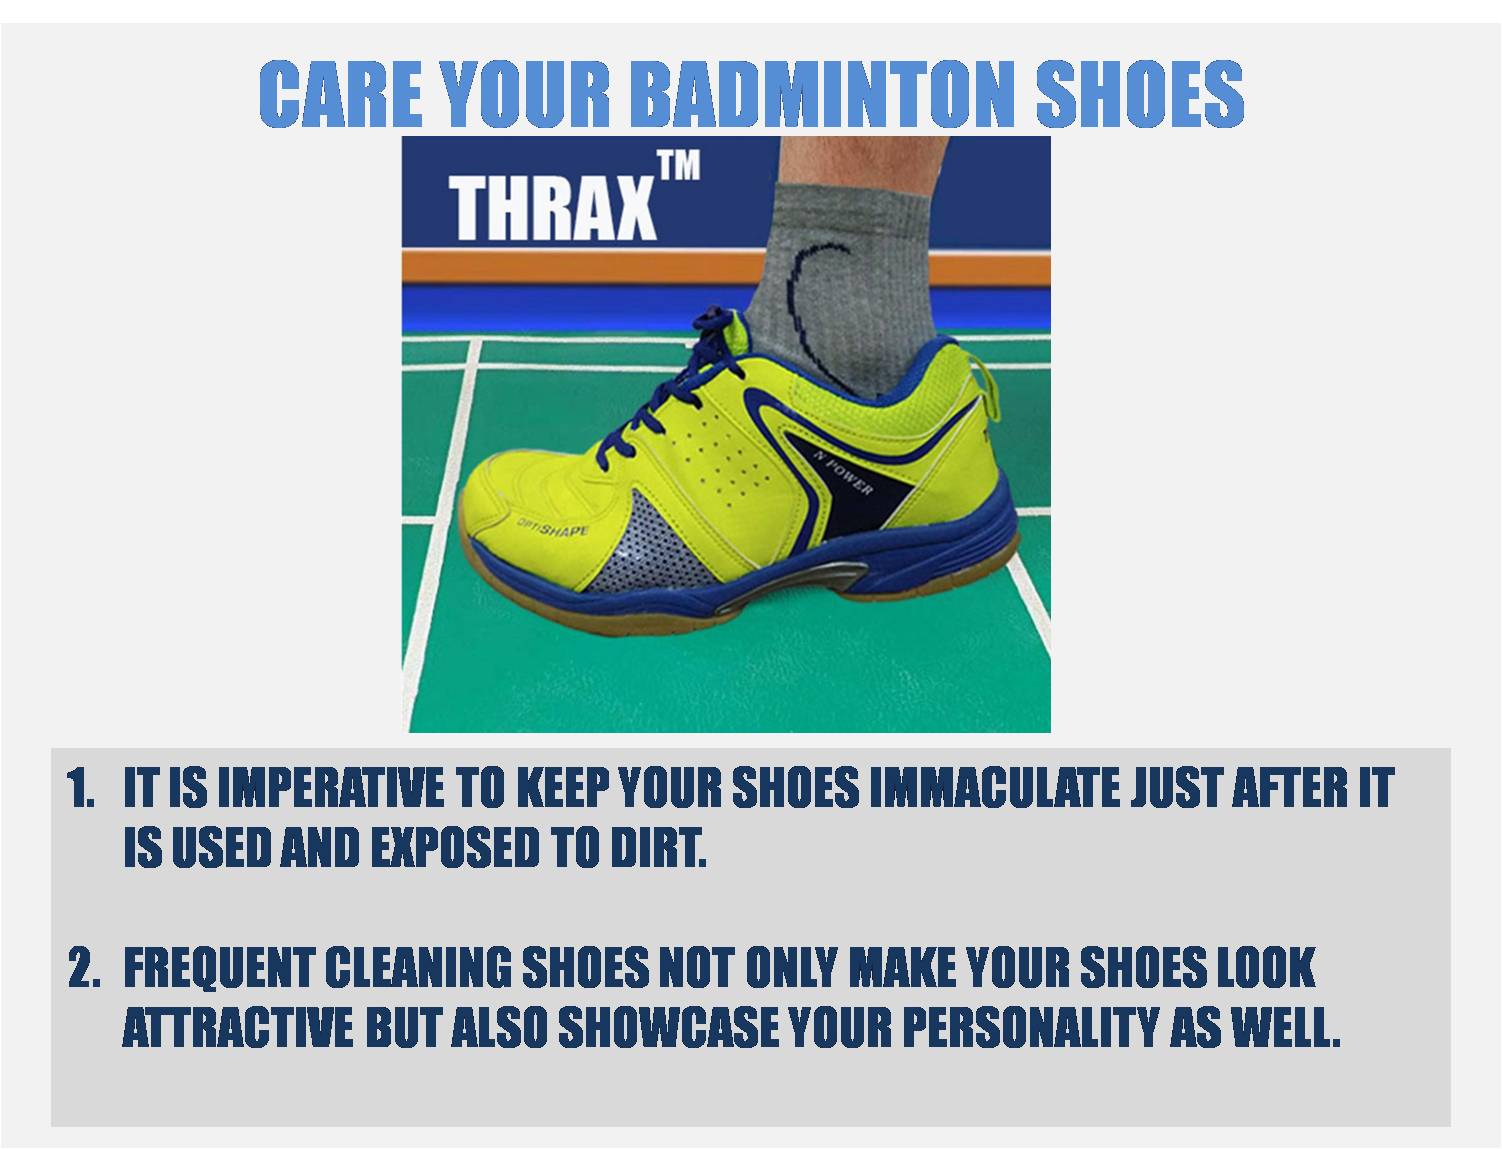 how_to_care_the_badminton_shoes_khelmart_Guide.jpg